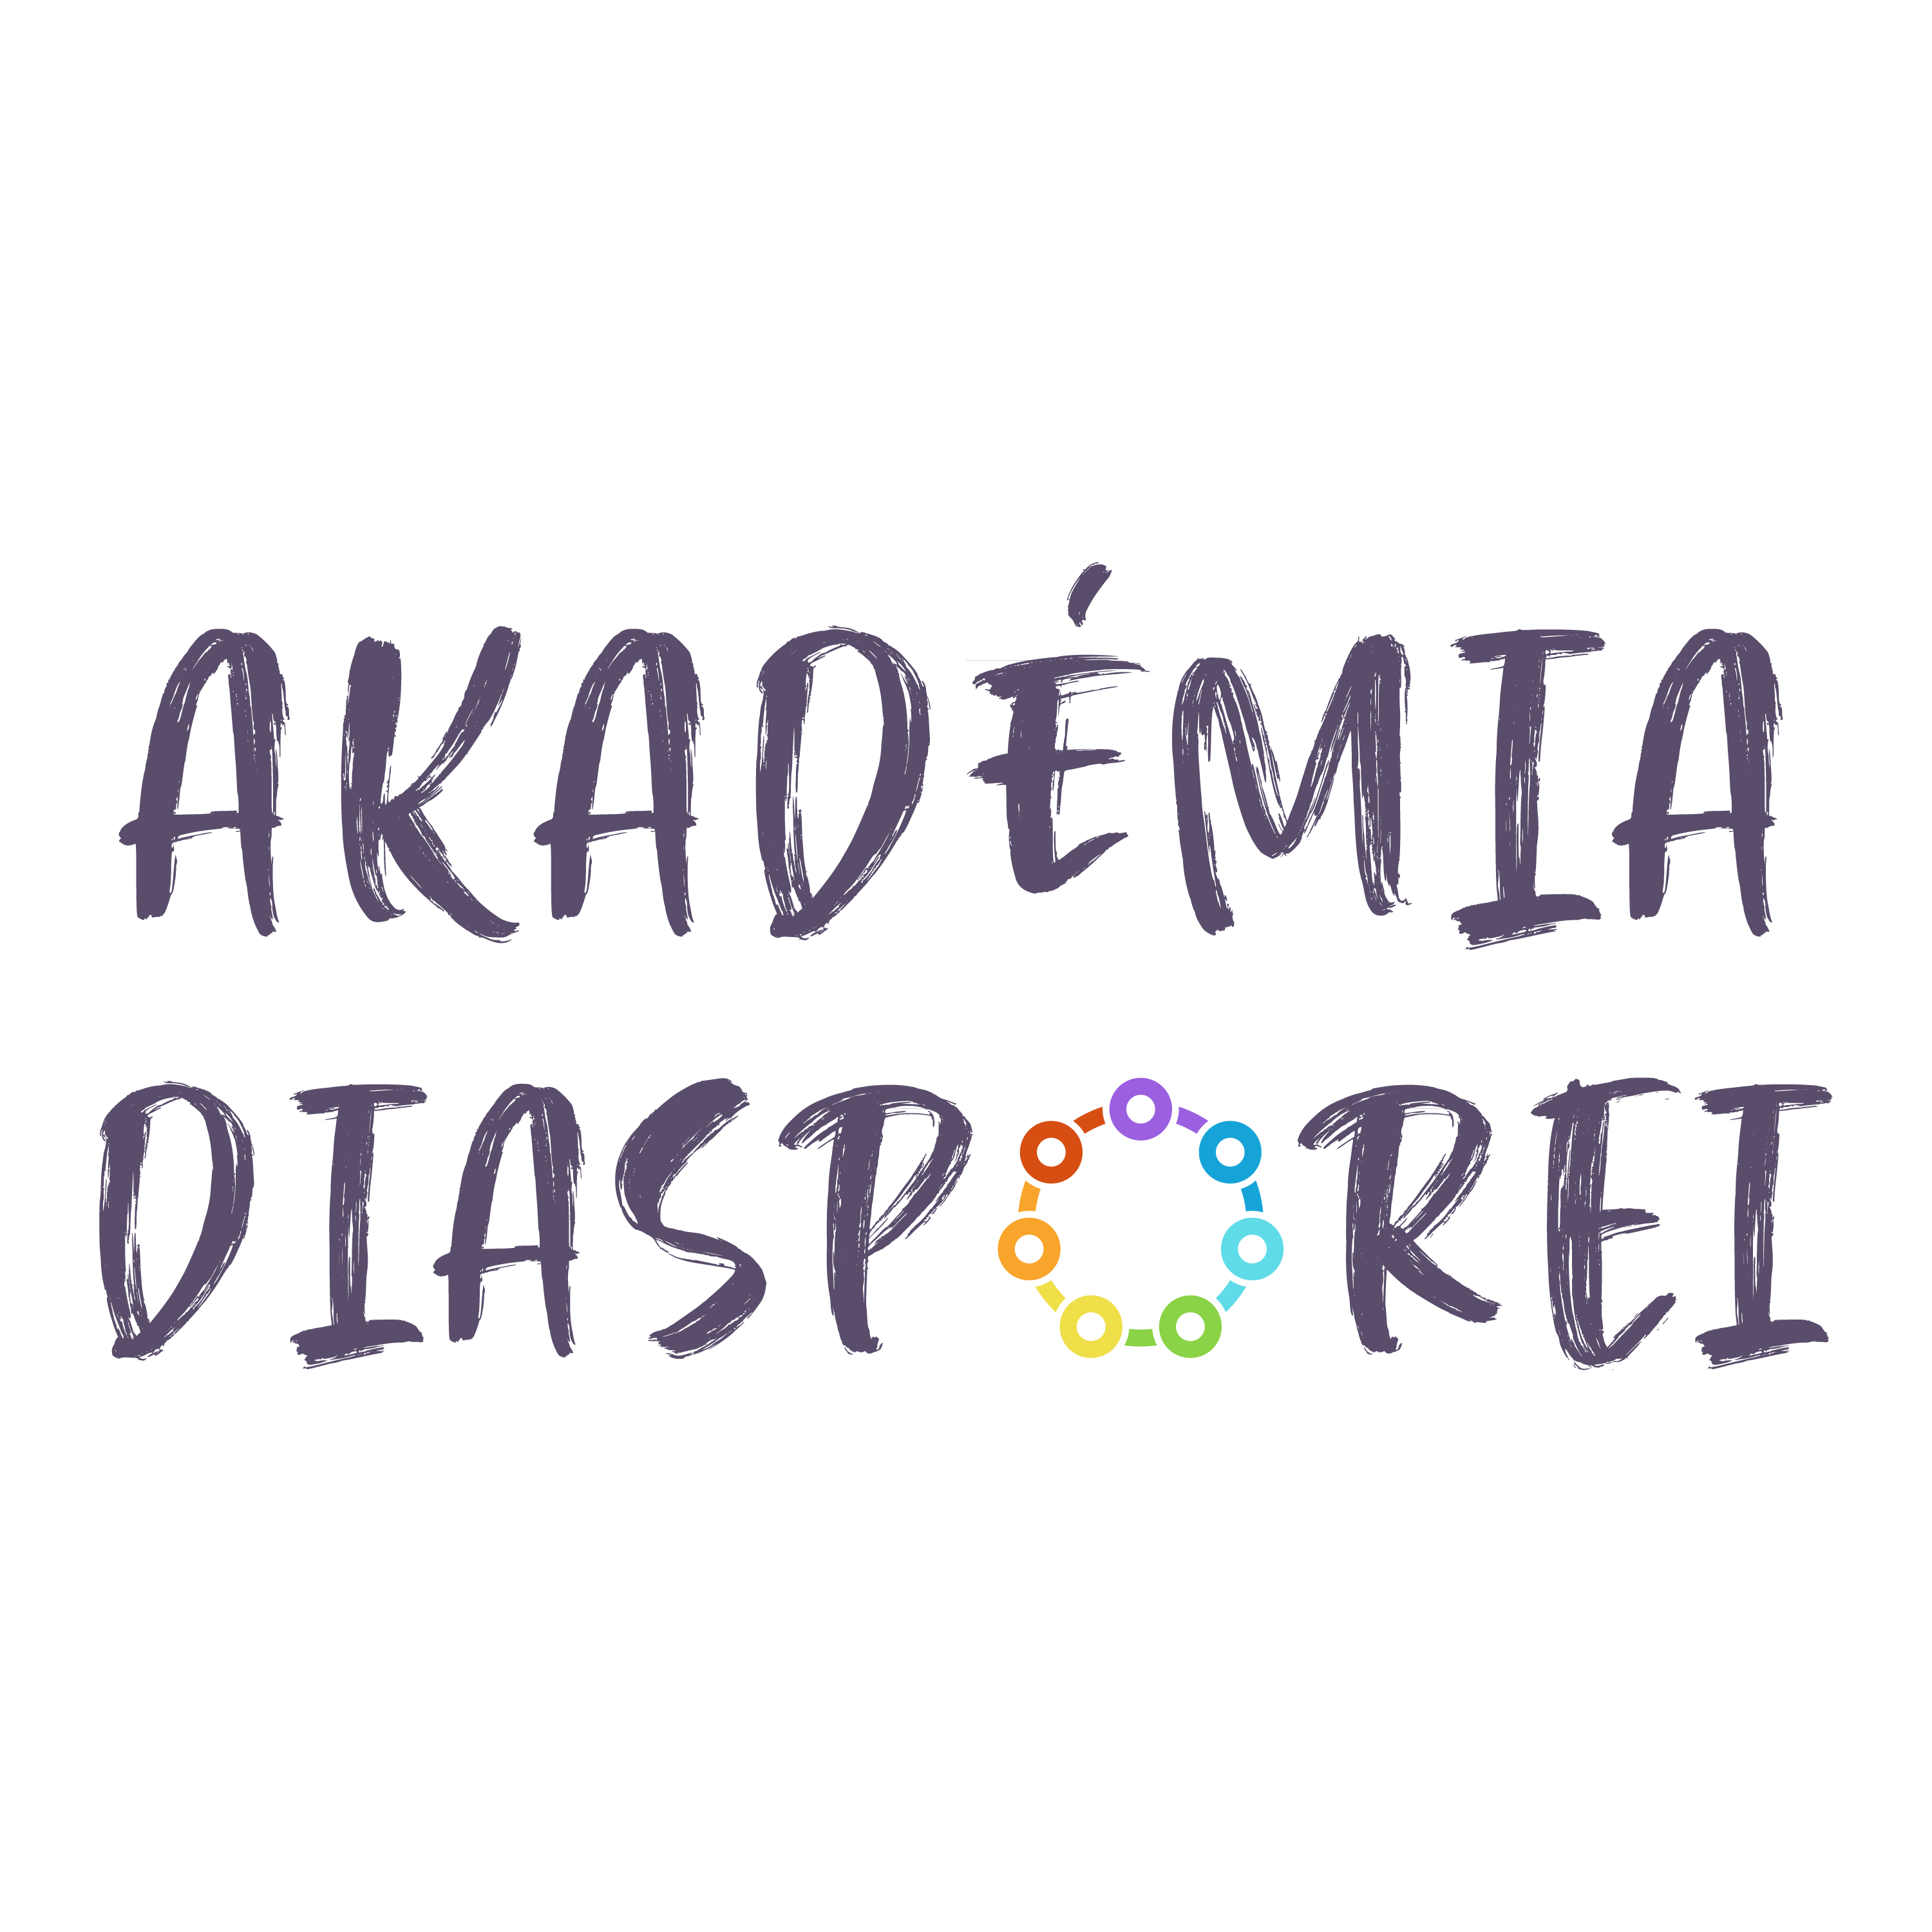 Akadémia Diasporei - a new project that aims to connect people and build capacity